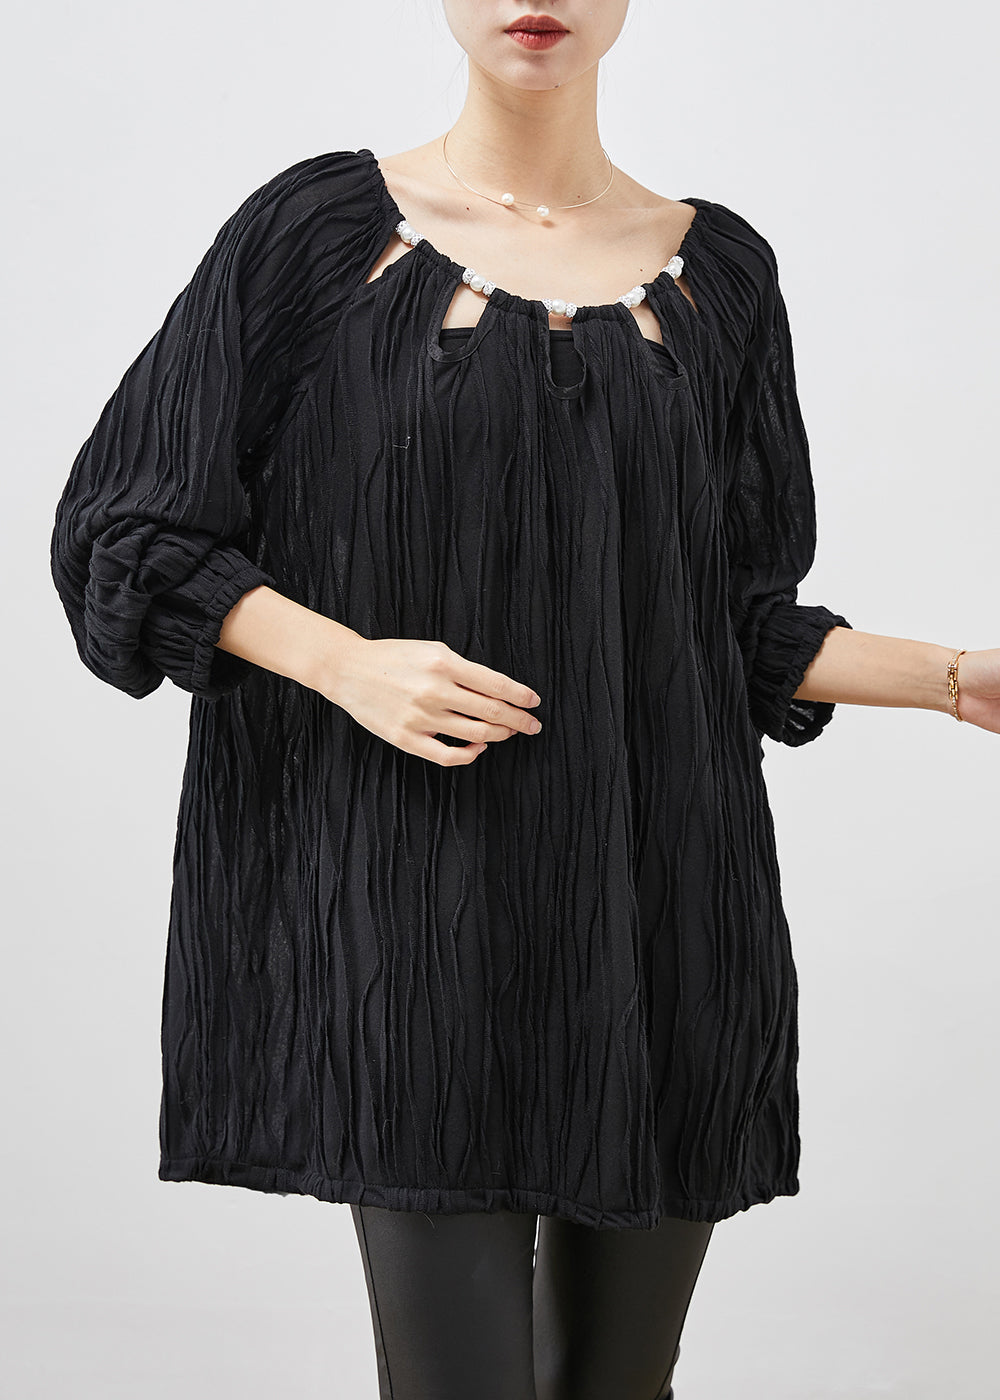 Black Cotton Blouse Tops Wrinkled Hollow Out Spring